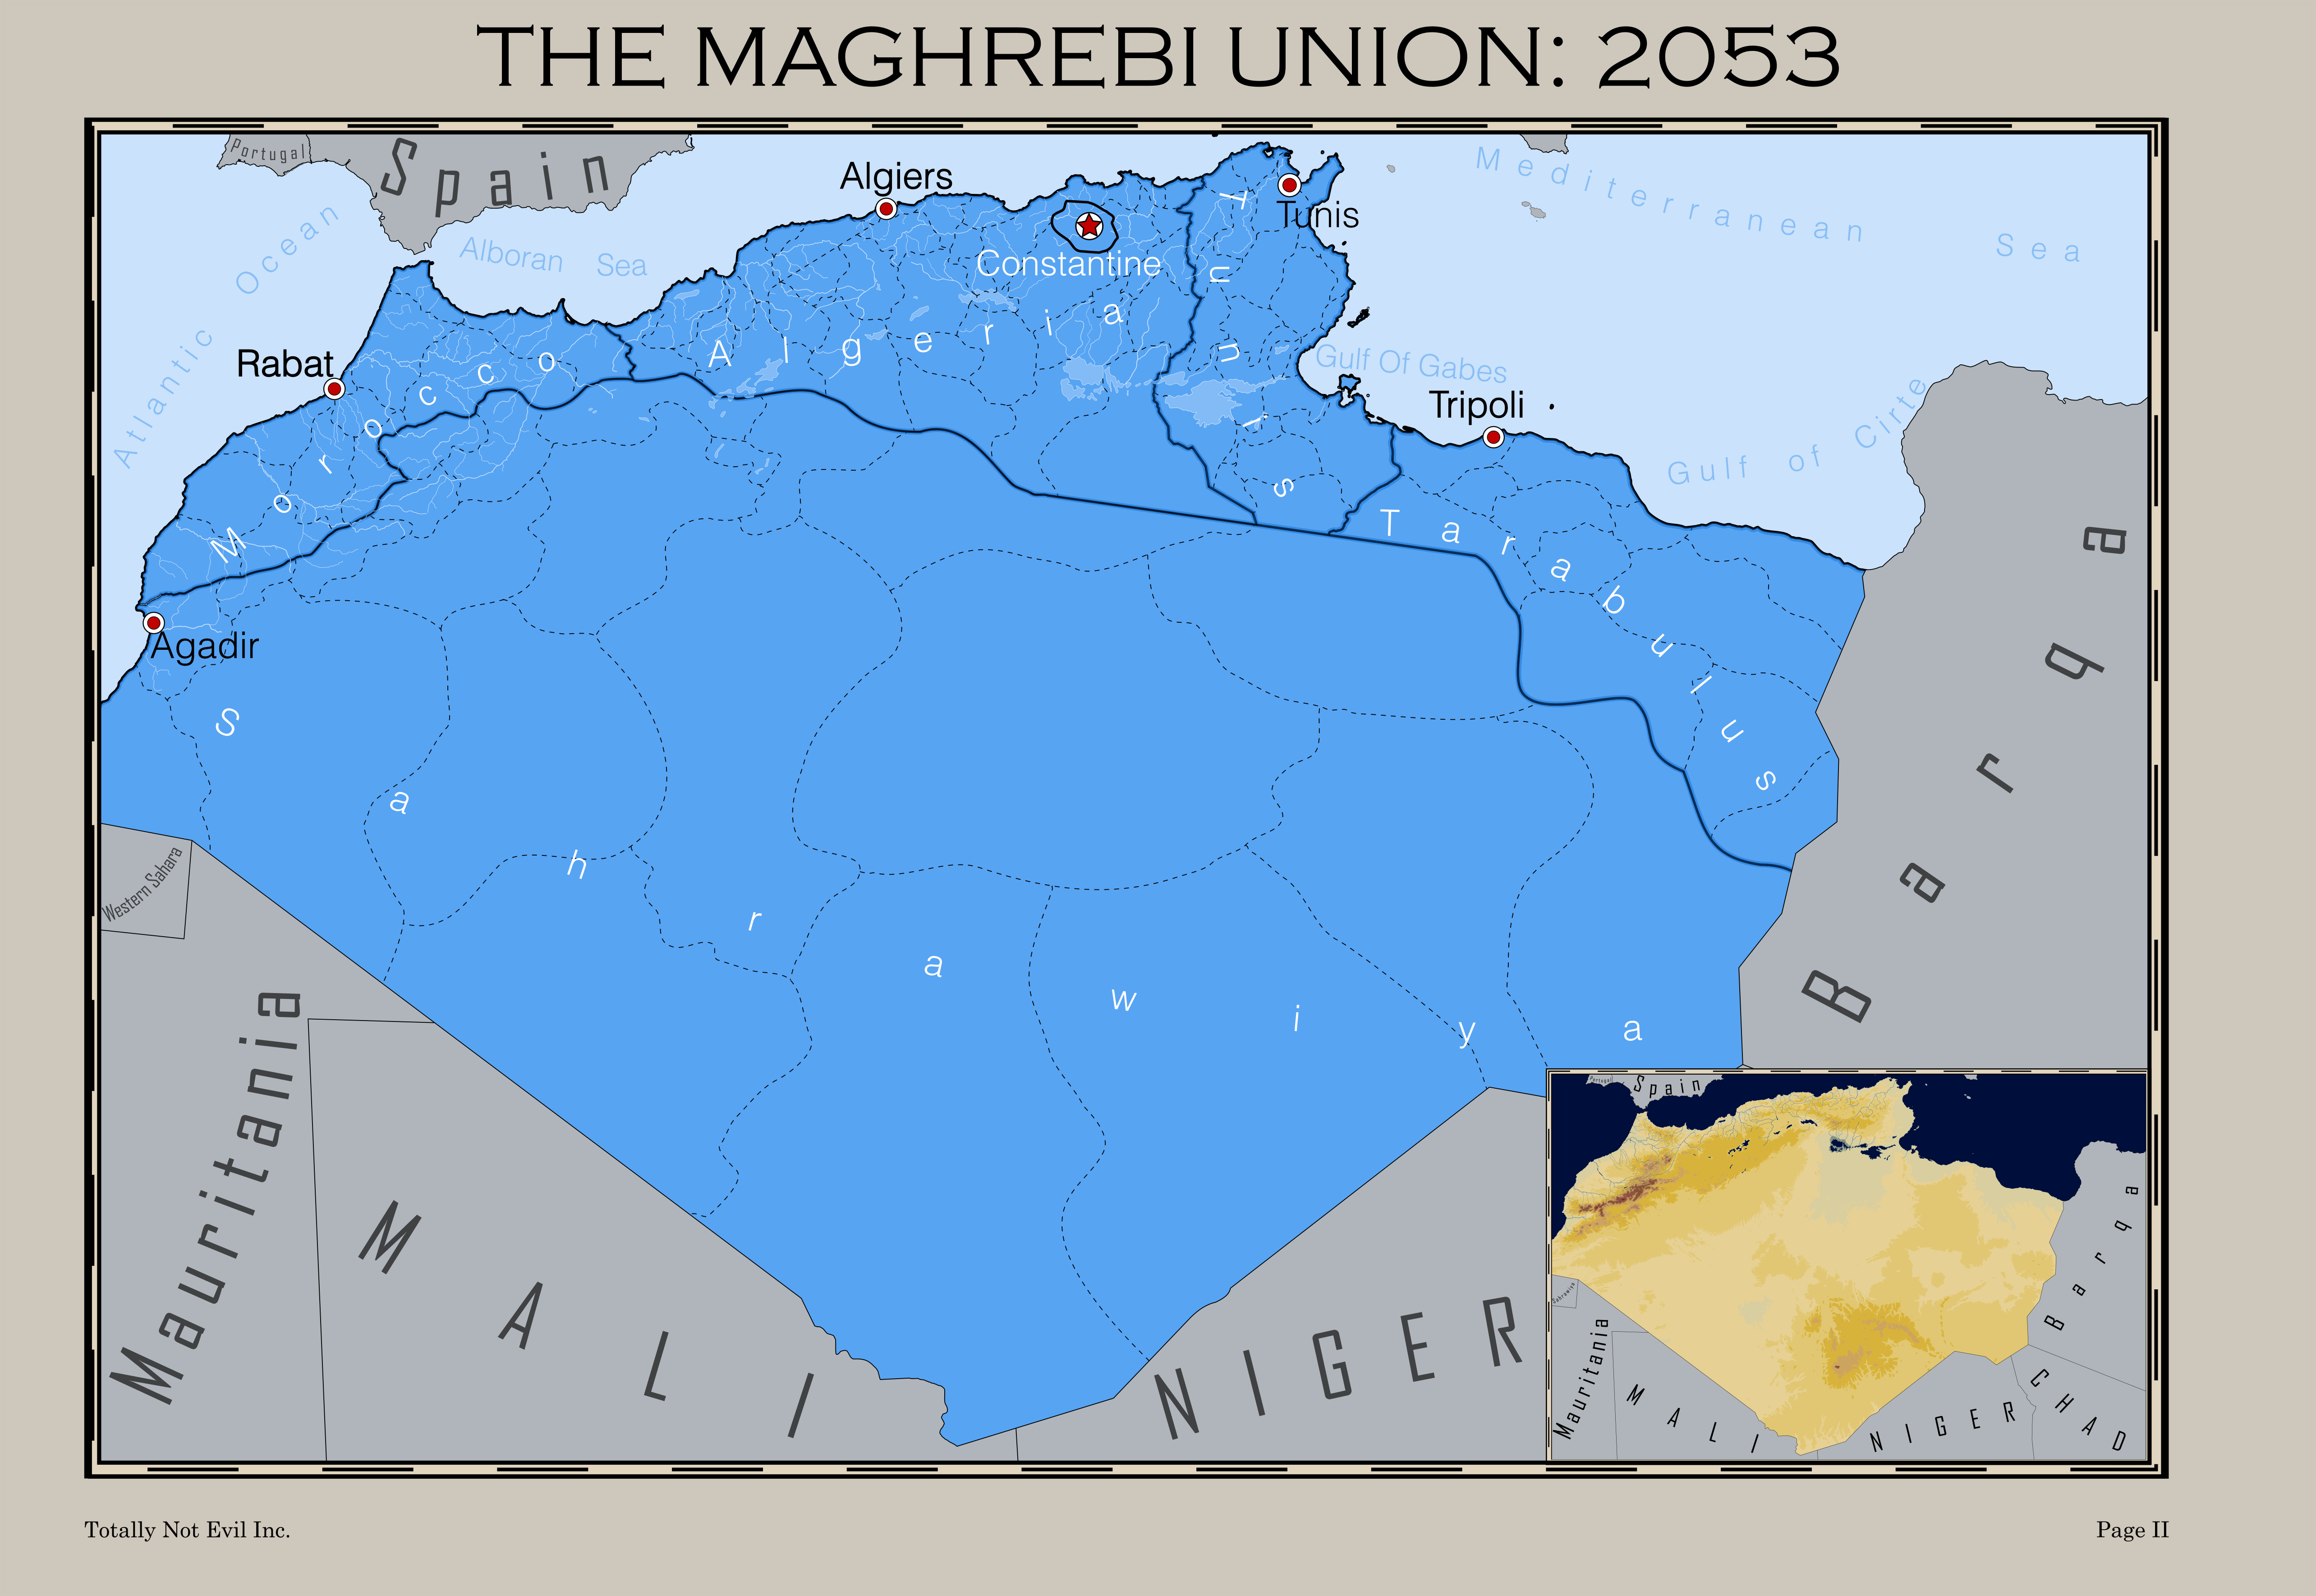 the_maghrebi_union_by_xotaed-dbfdq5o.png